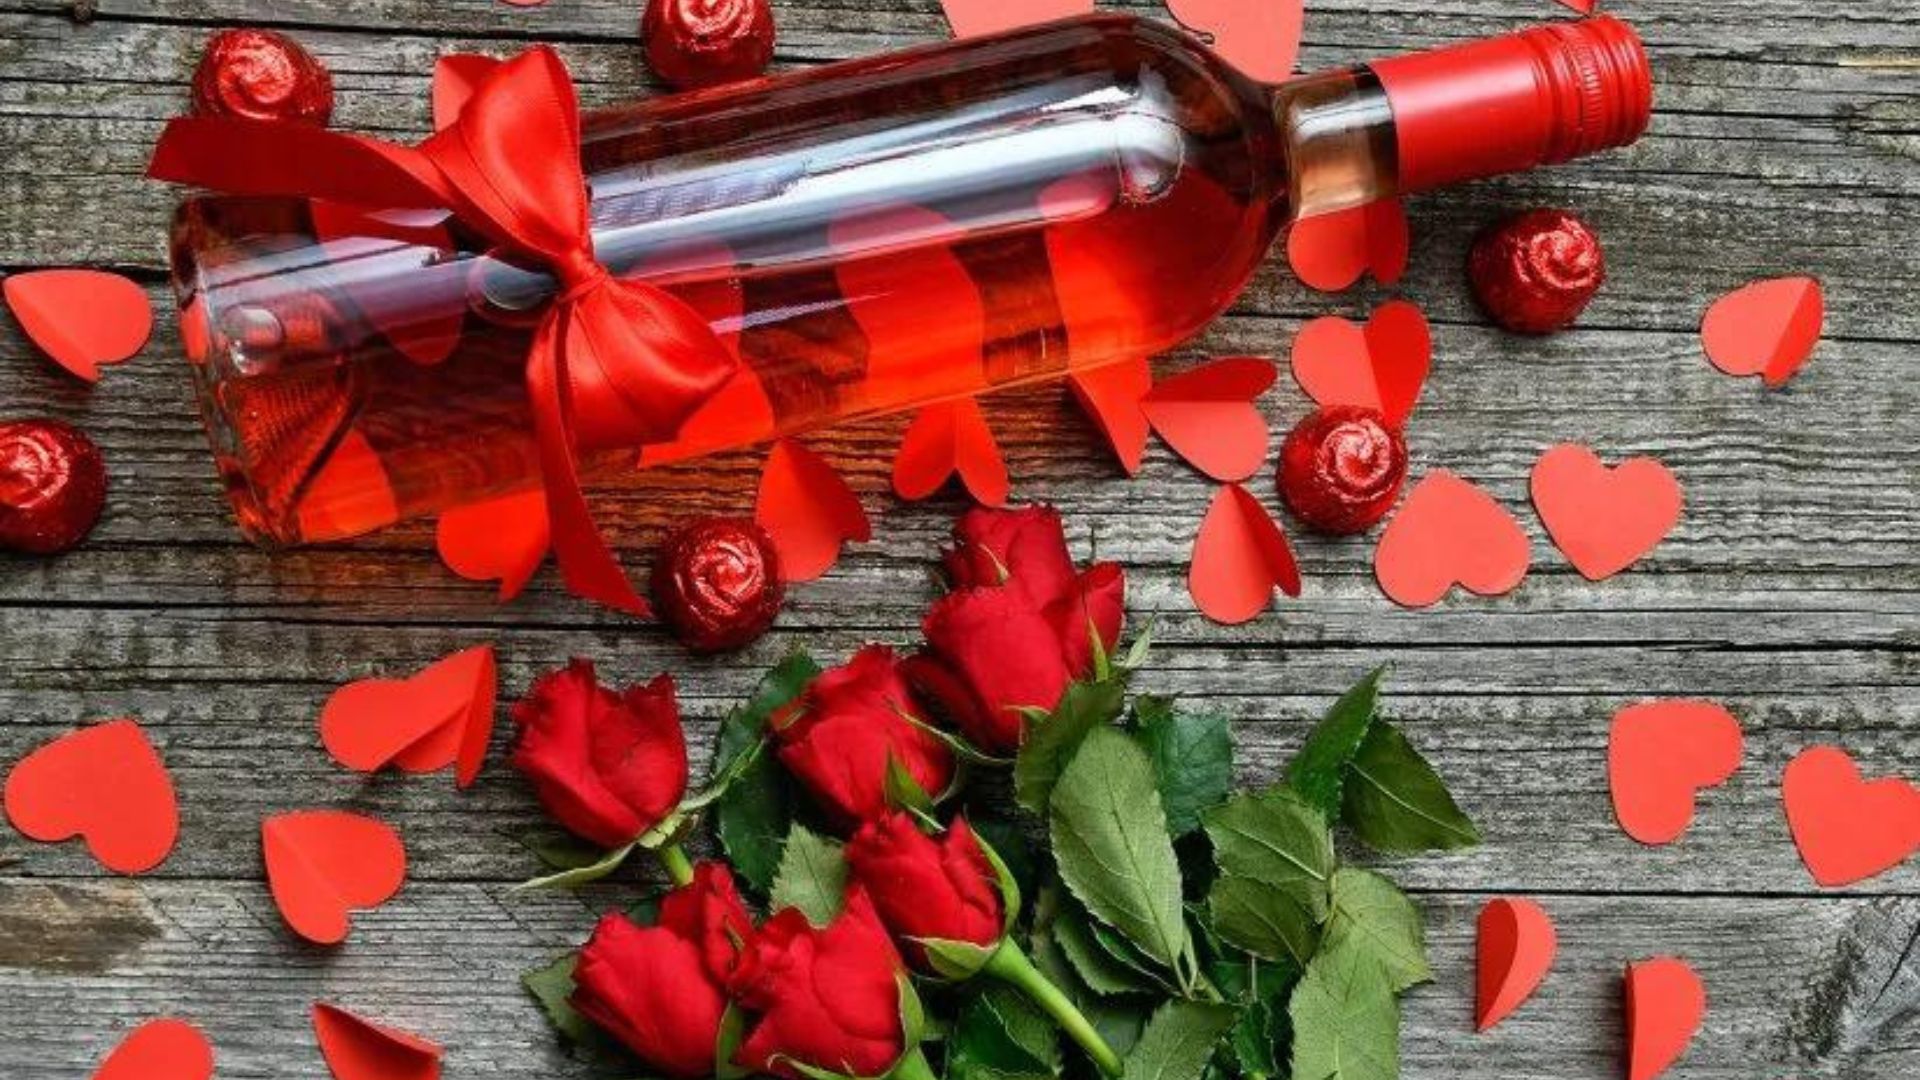 Why Do We Give Red Roses on Valentine's Day